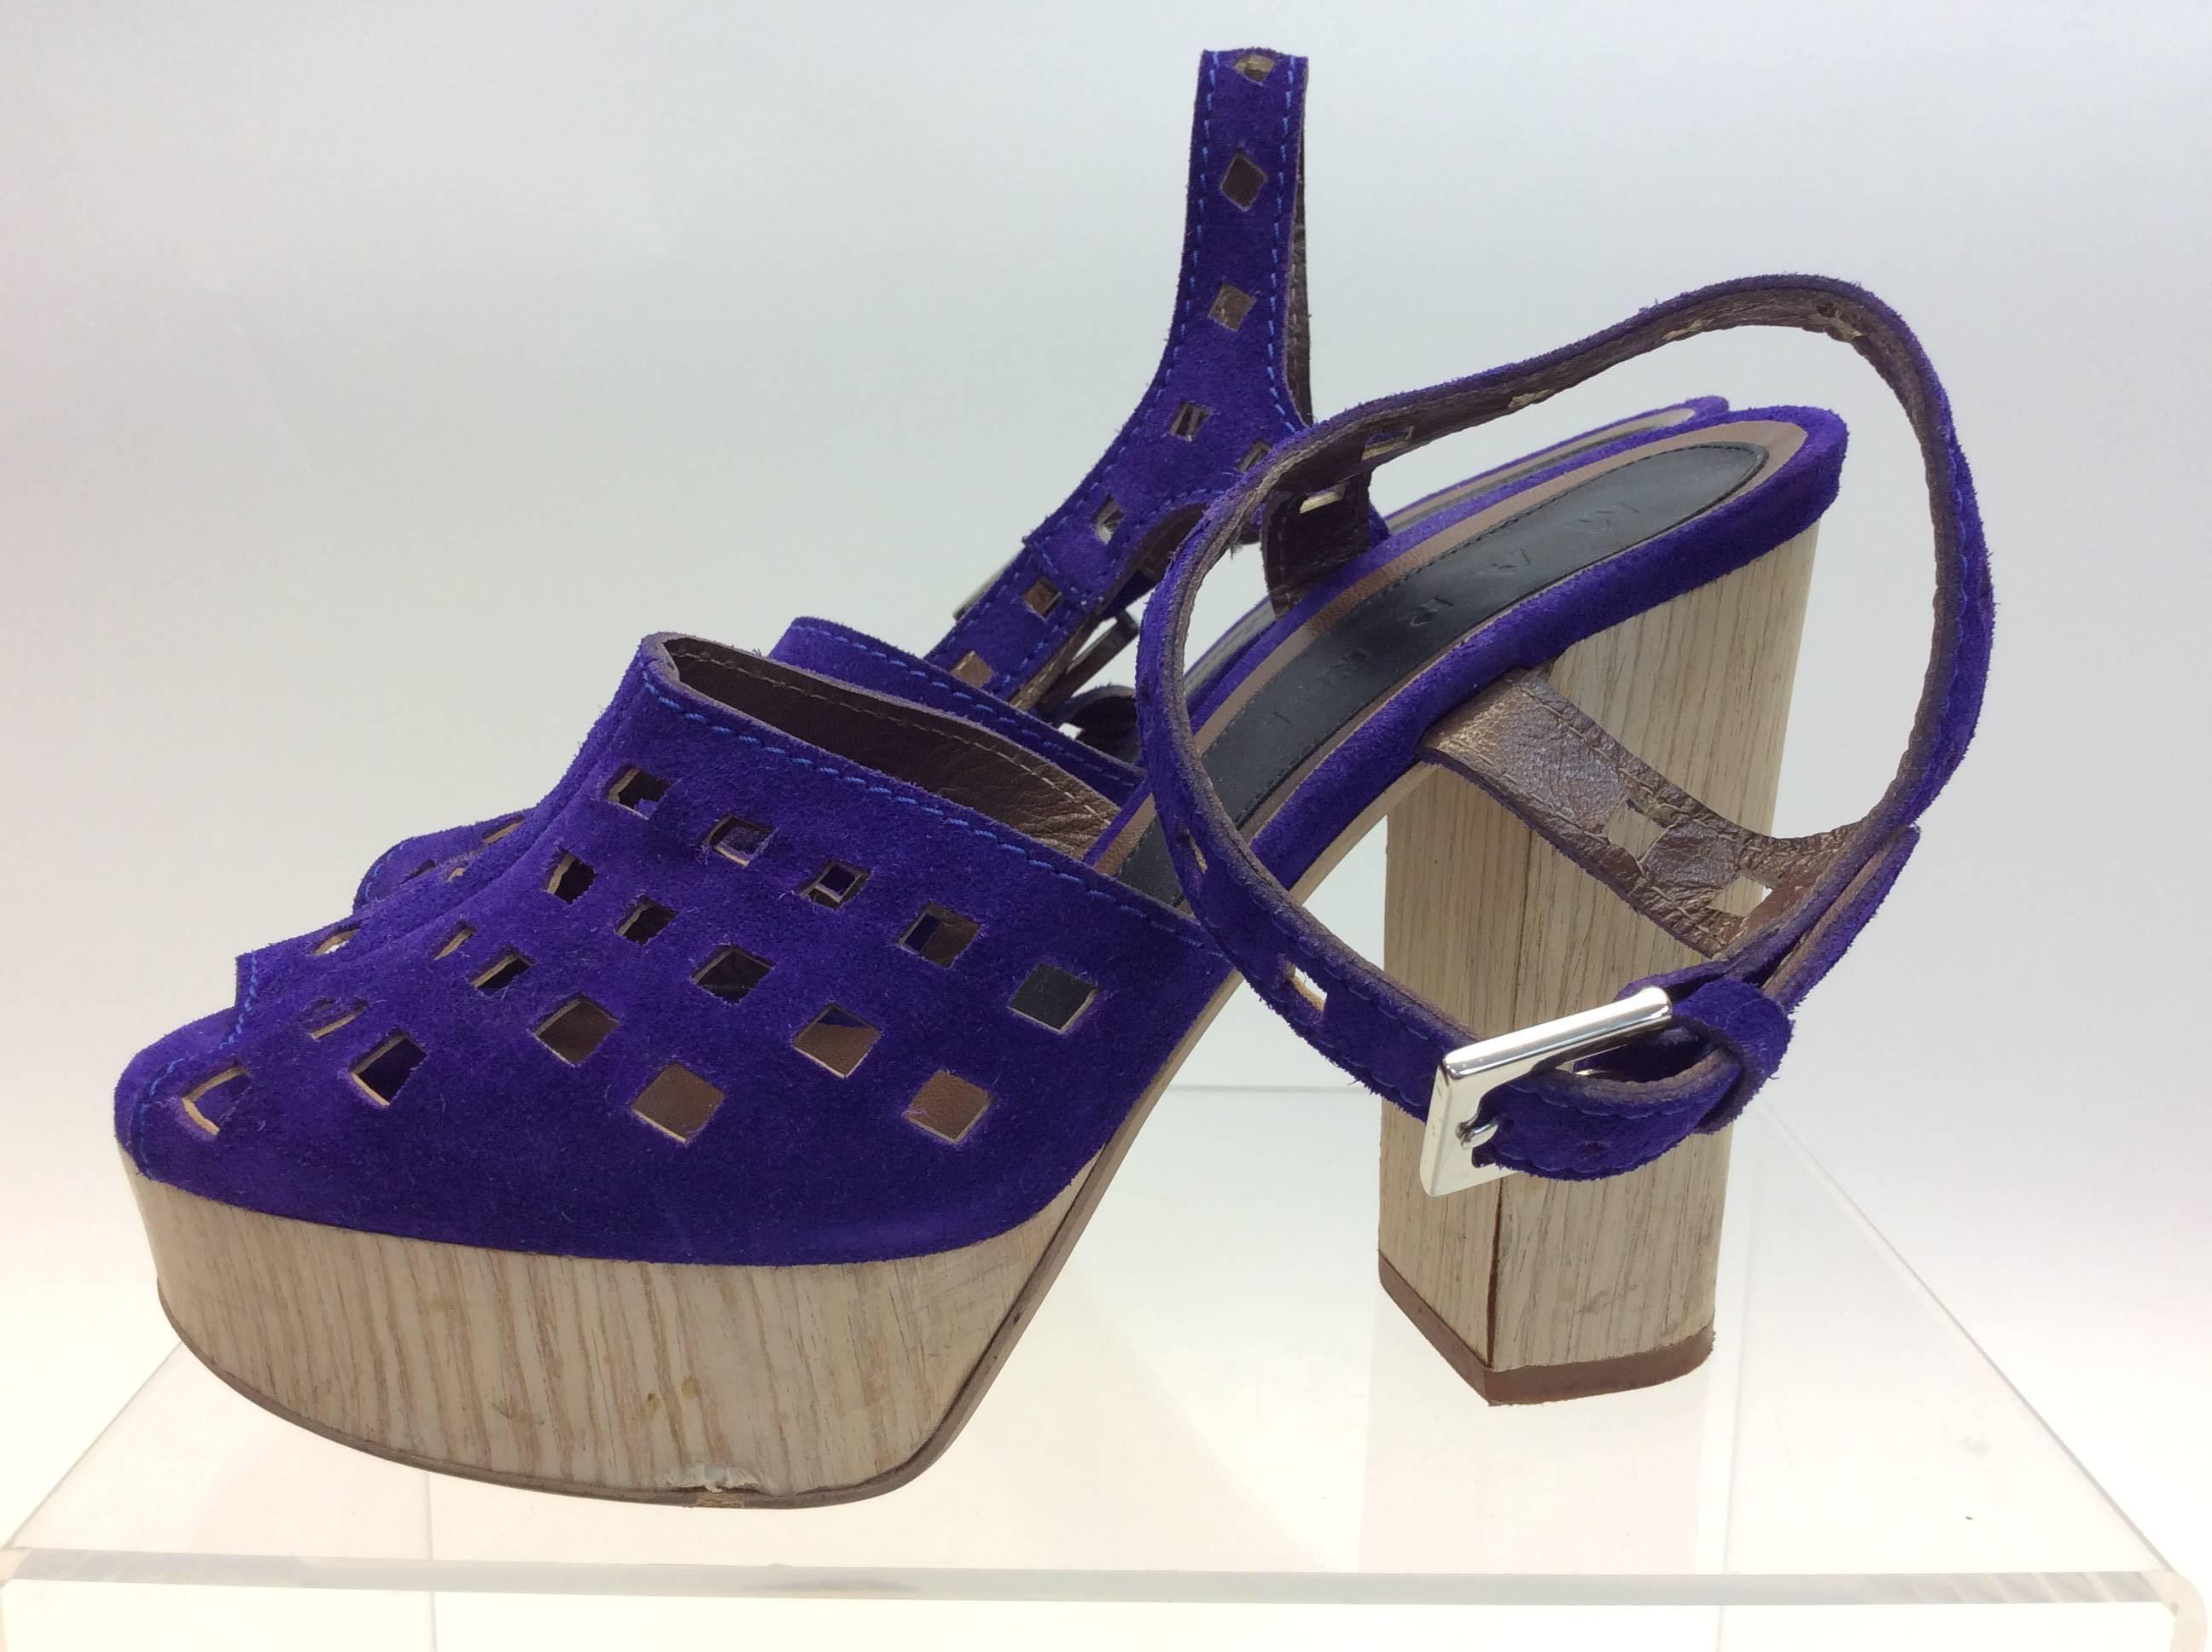 Marni Purple Leather Cutout Heel
$299
Made in Italy
Size 37
5